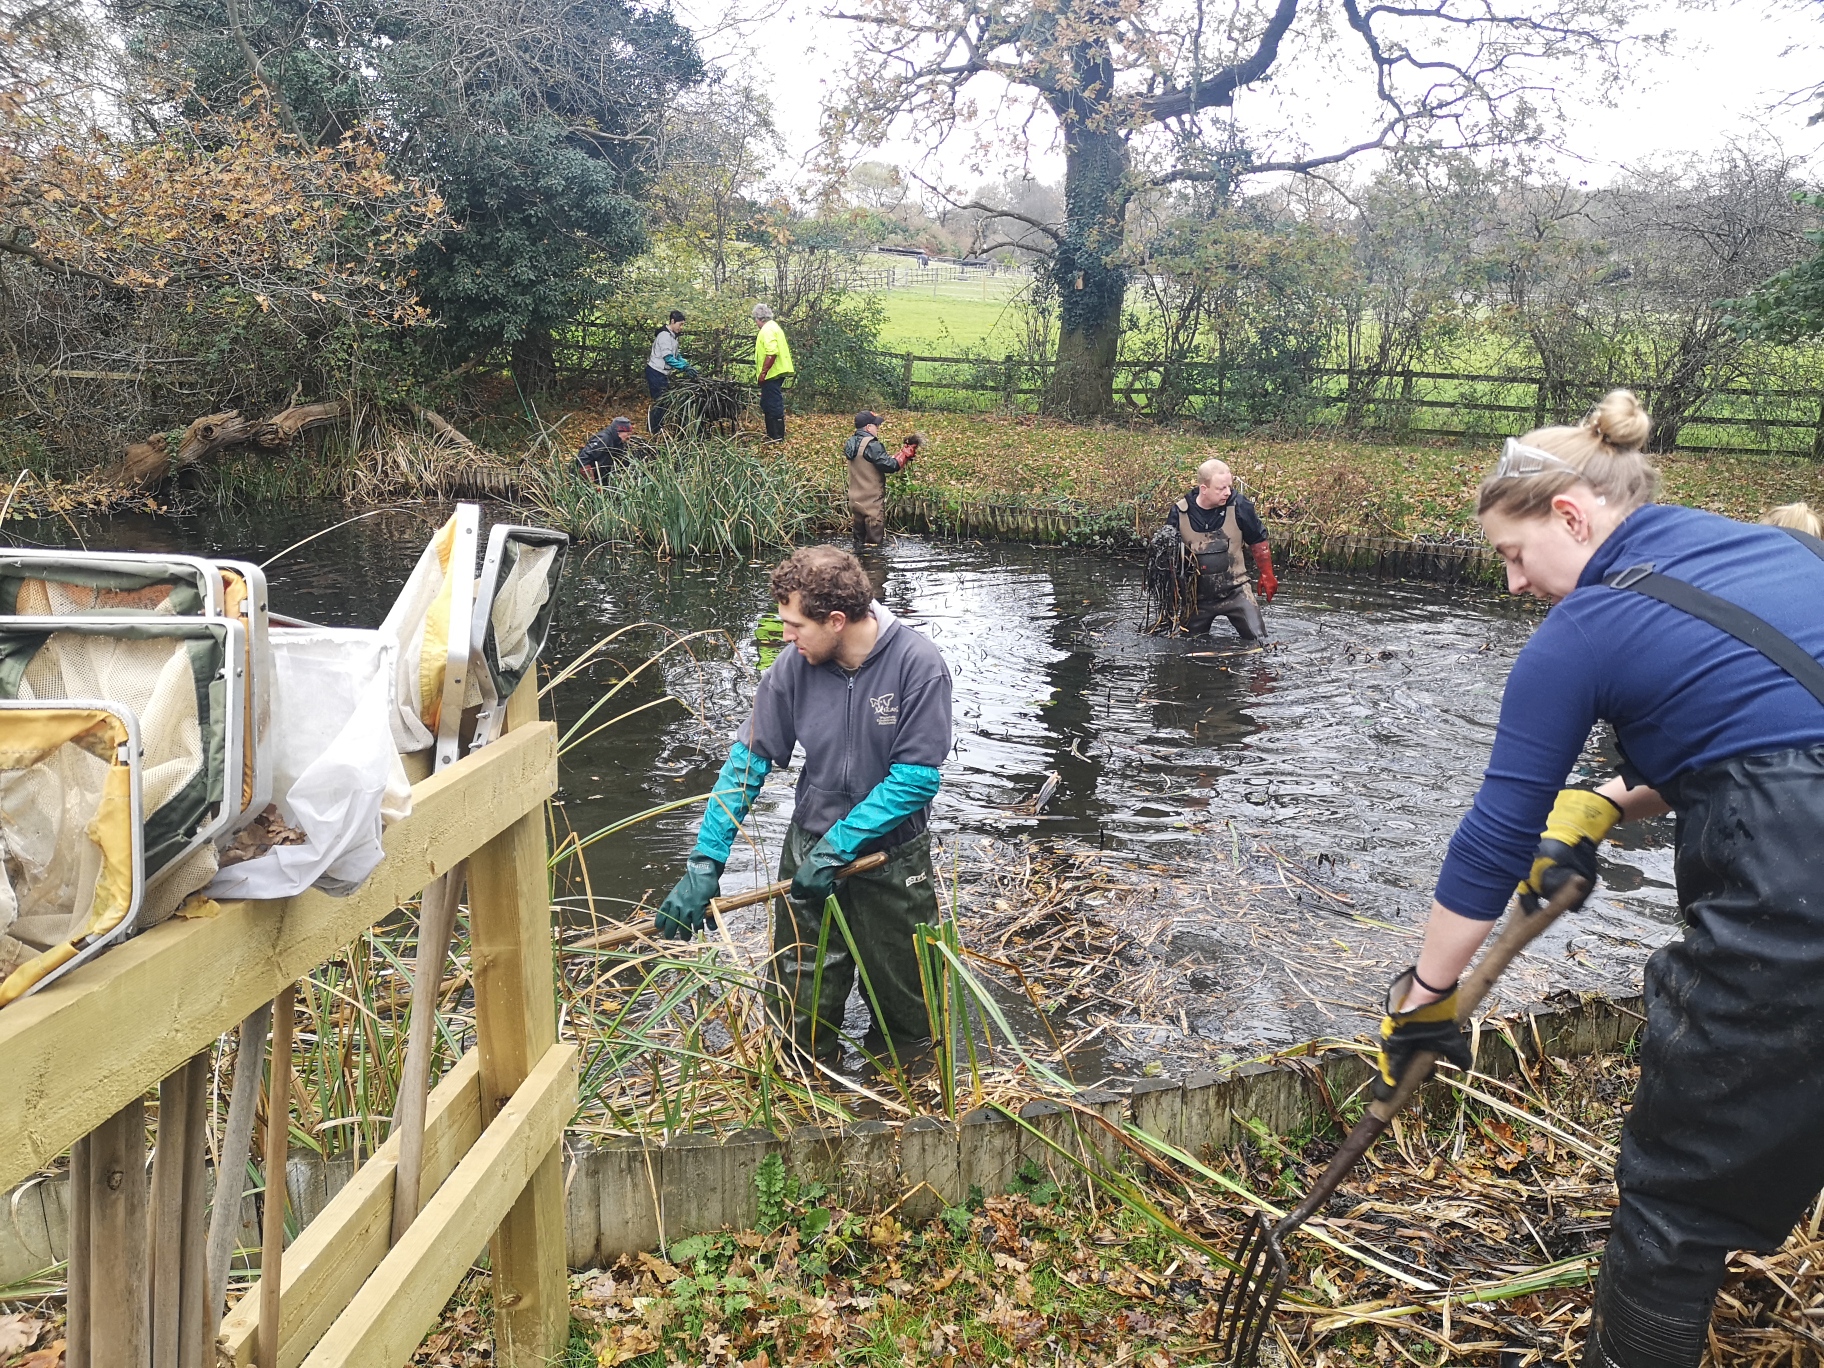 people in waders clearing out vegetation from a pond